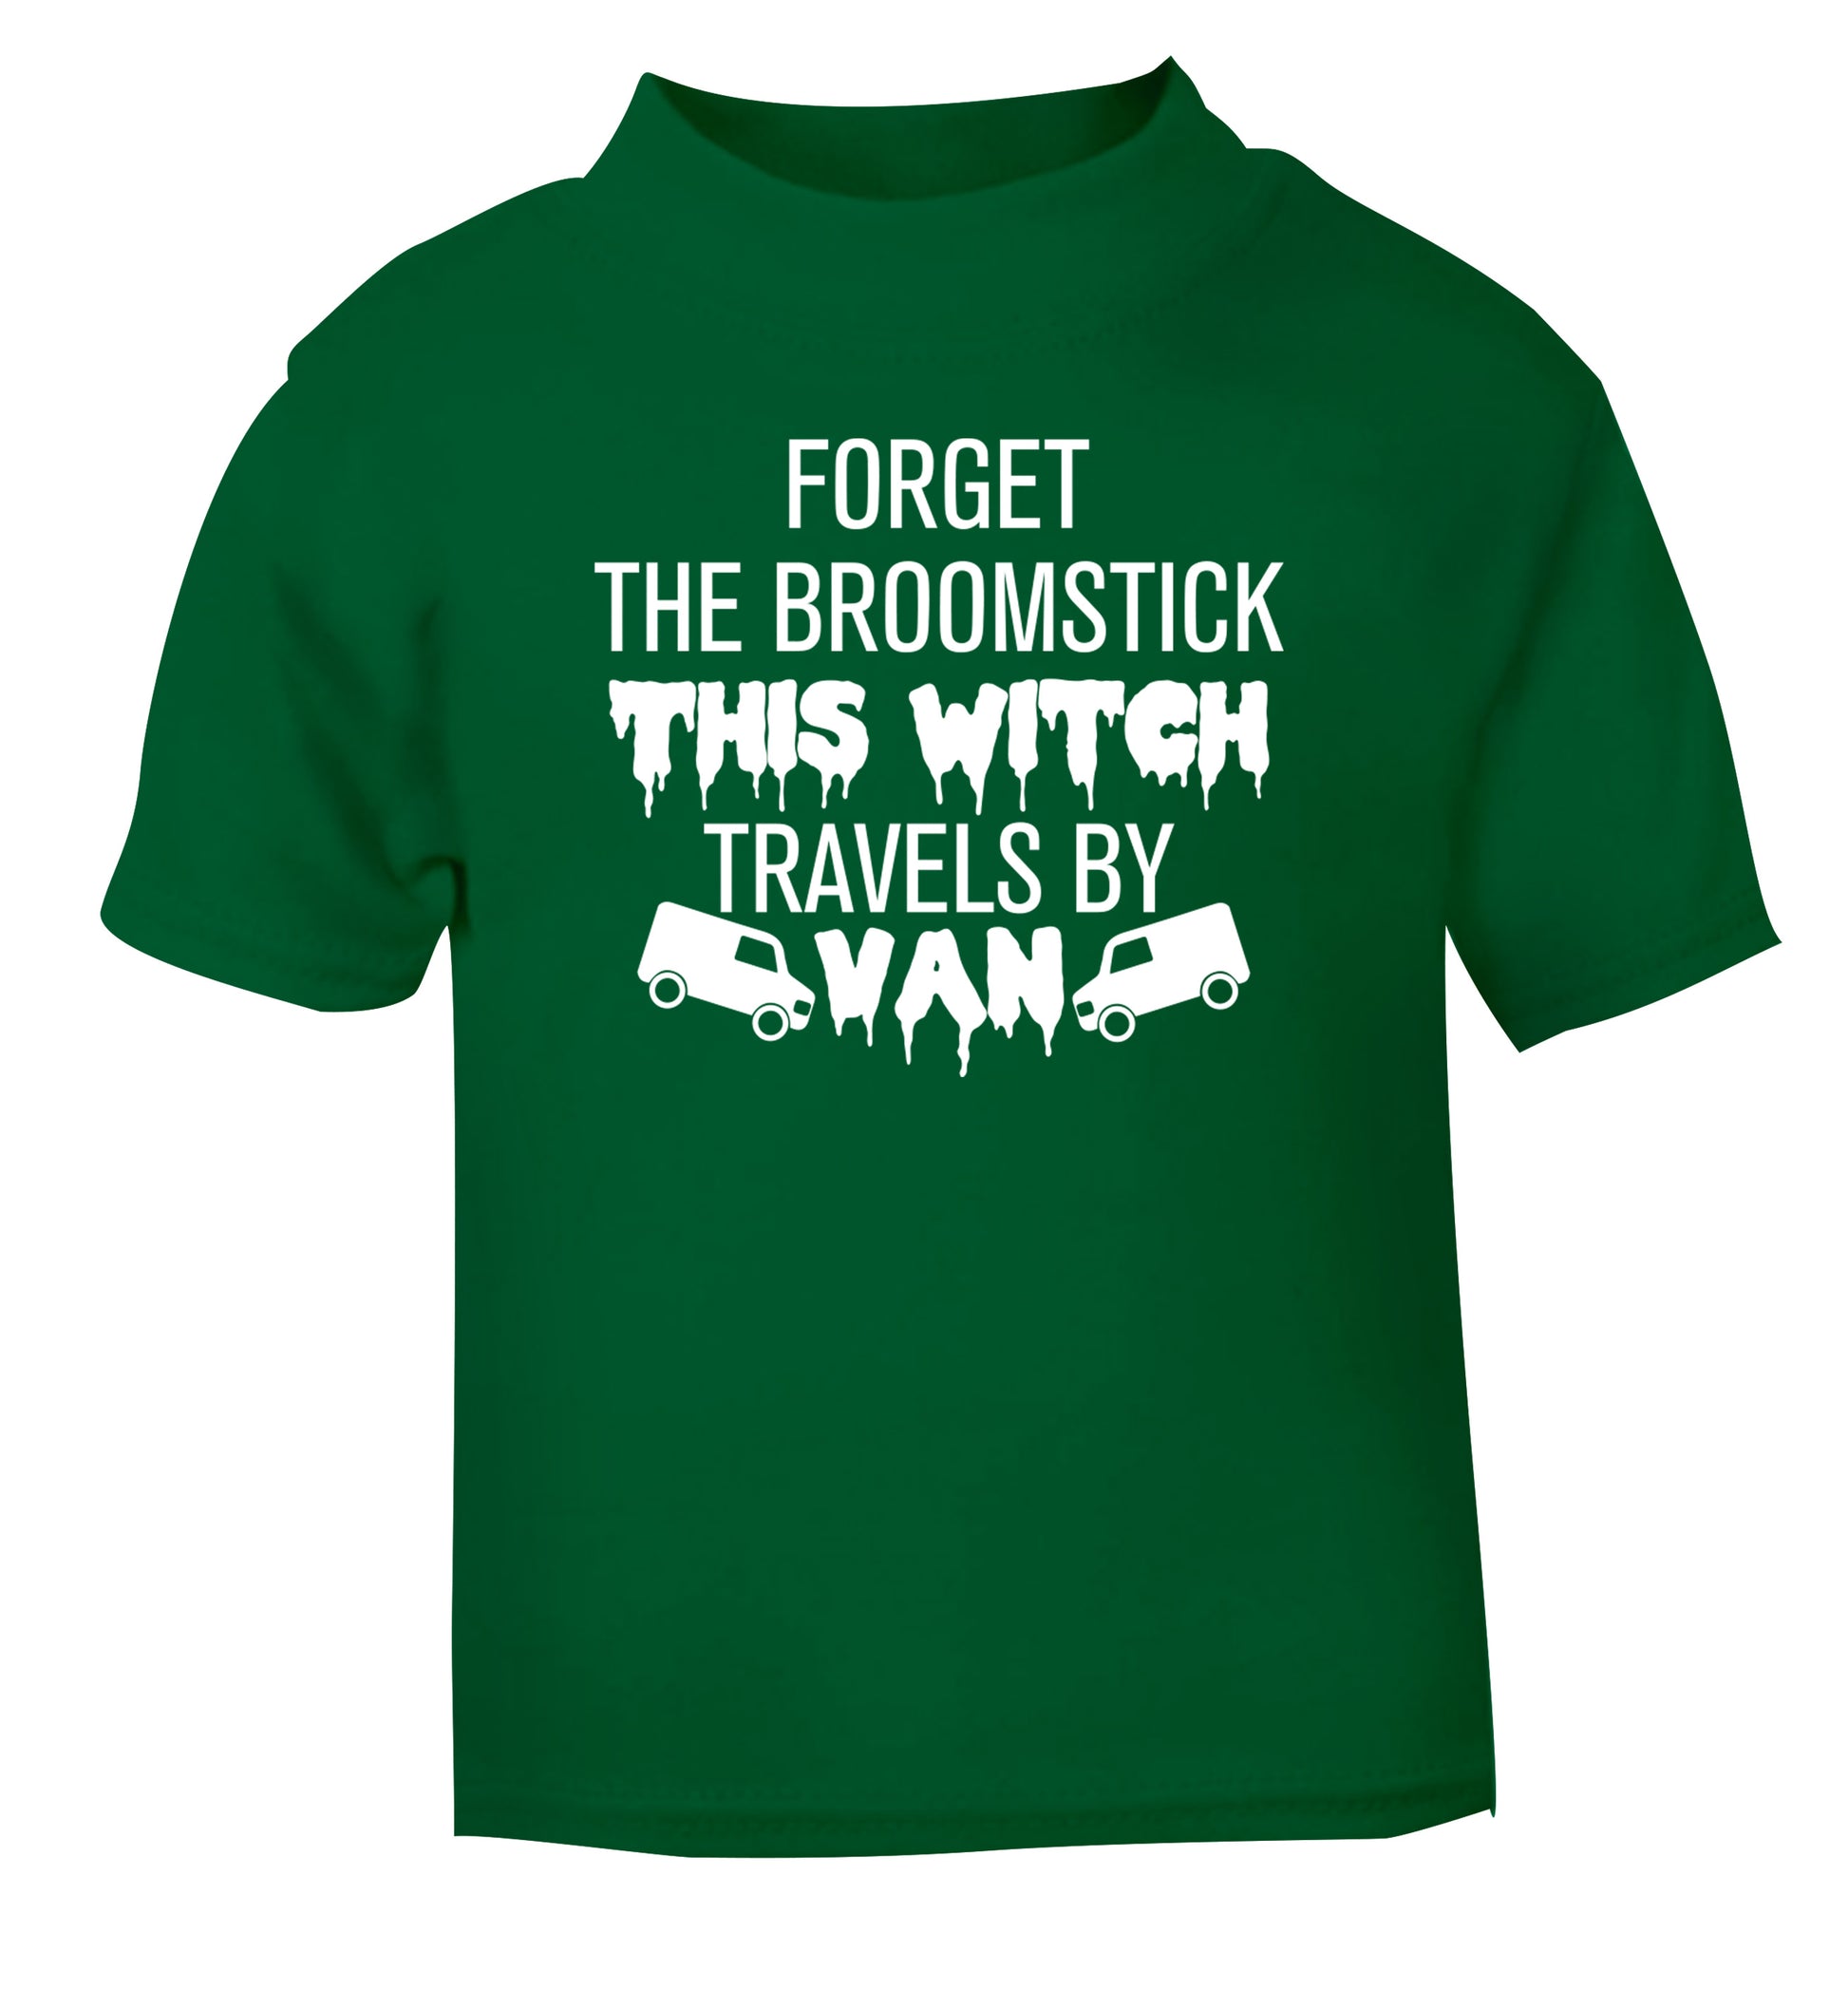 Forget the broomstick this witch travels by van green Baby Toddler Tshirt 2 Years